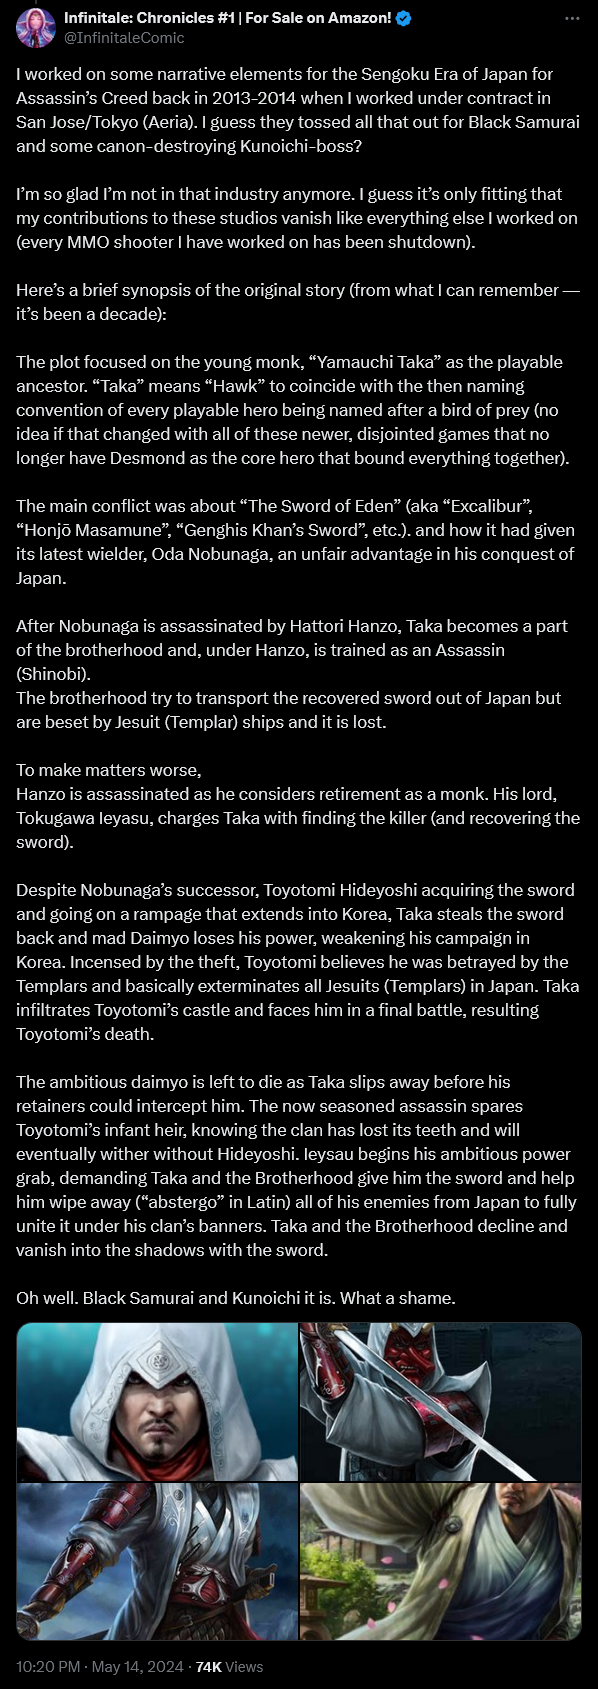 @InfinitaleComic reveals his original pitch for a Feudal Japan-era 'Assassin's Creed' title.